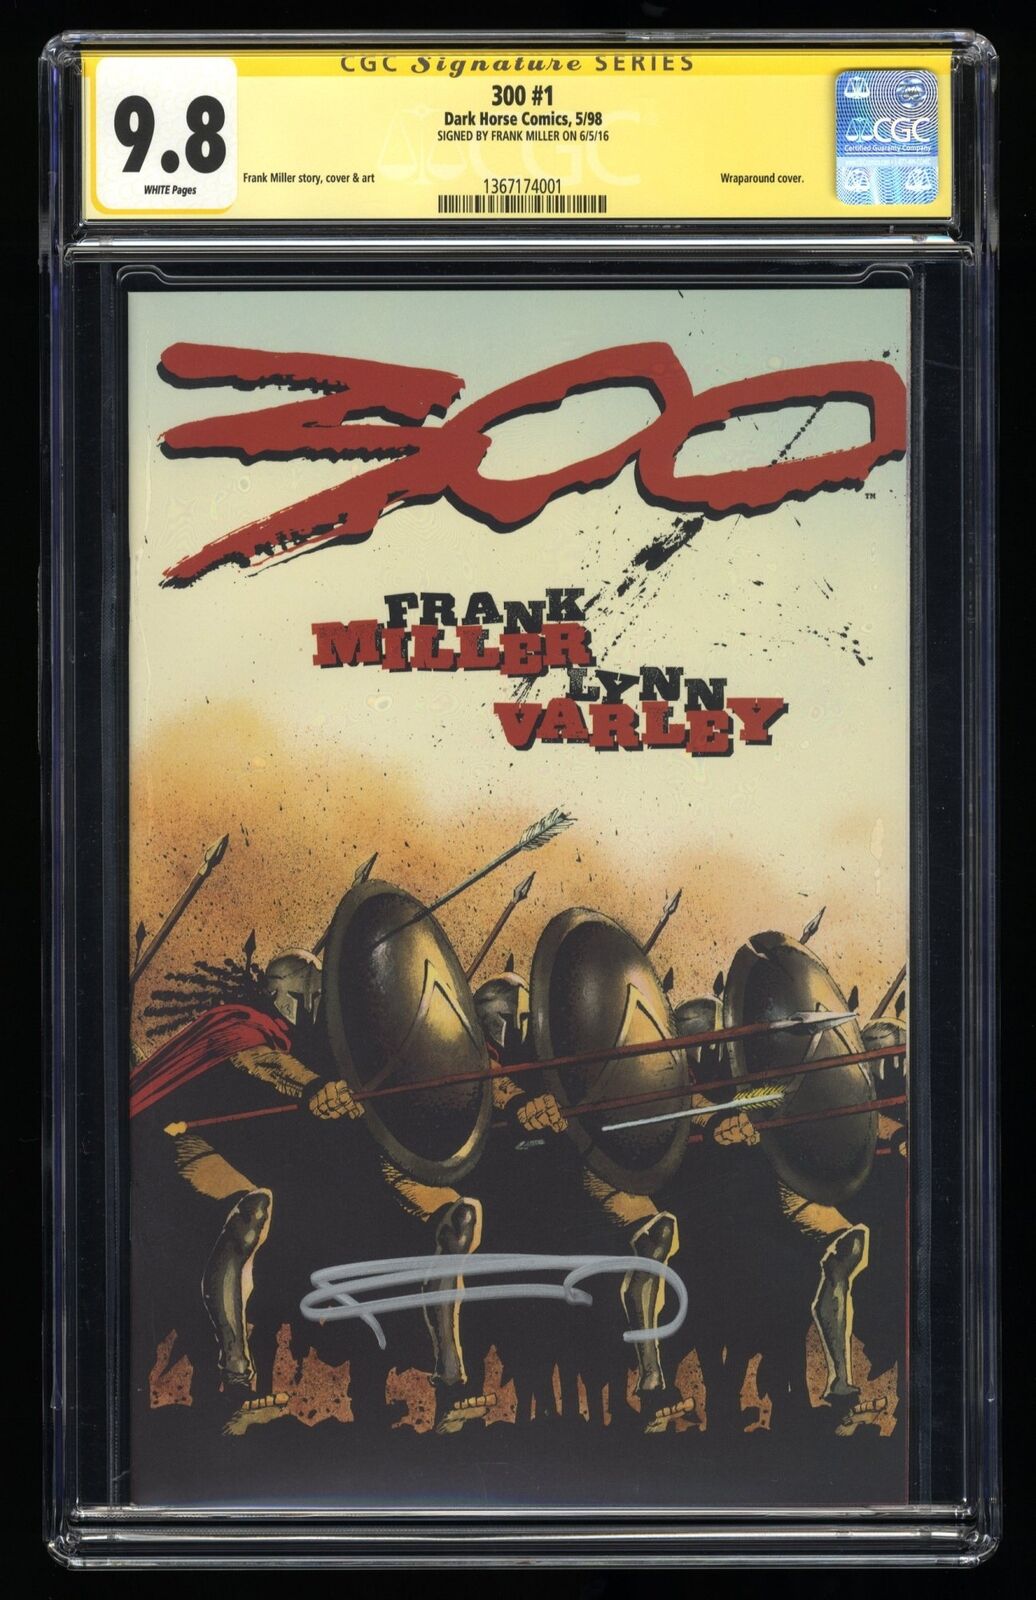 300 (1998) #1 CGC NM/M 9.8 White Pages SS Signed Frank Miller Frank Miller